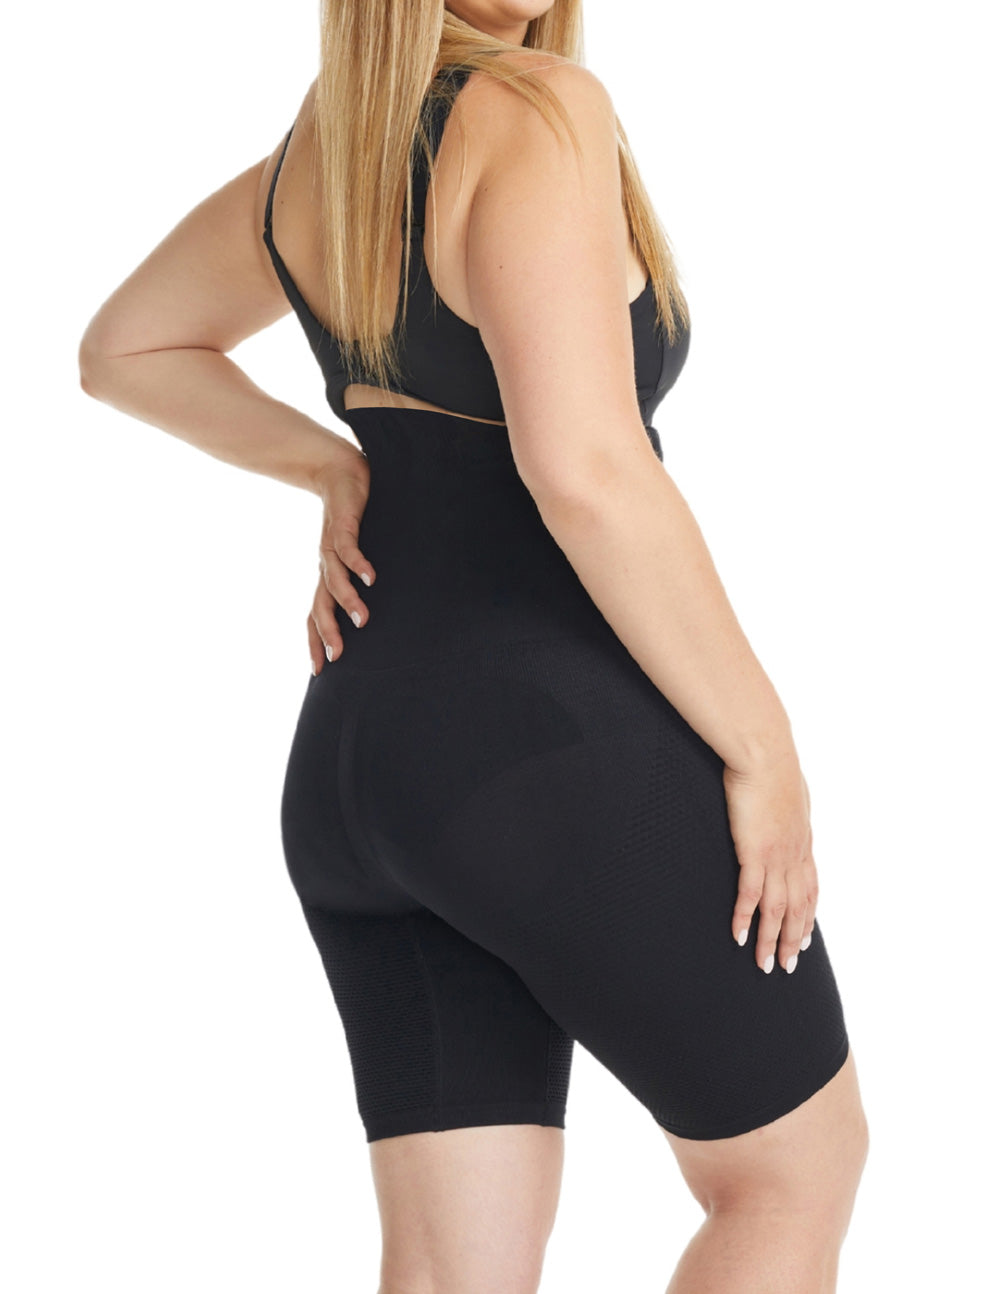 black plus size control top shapewear biker shorts for chafing